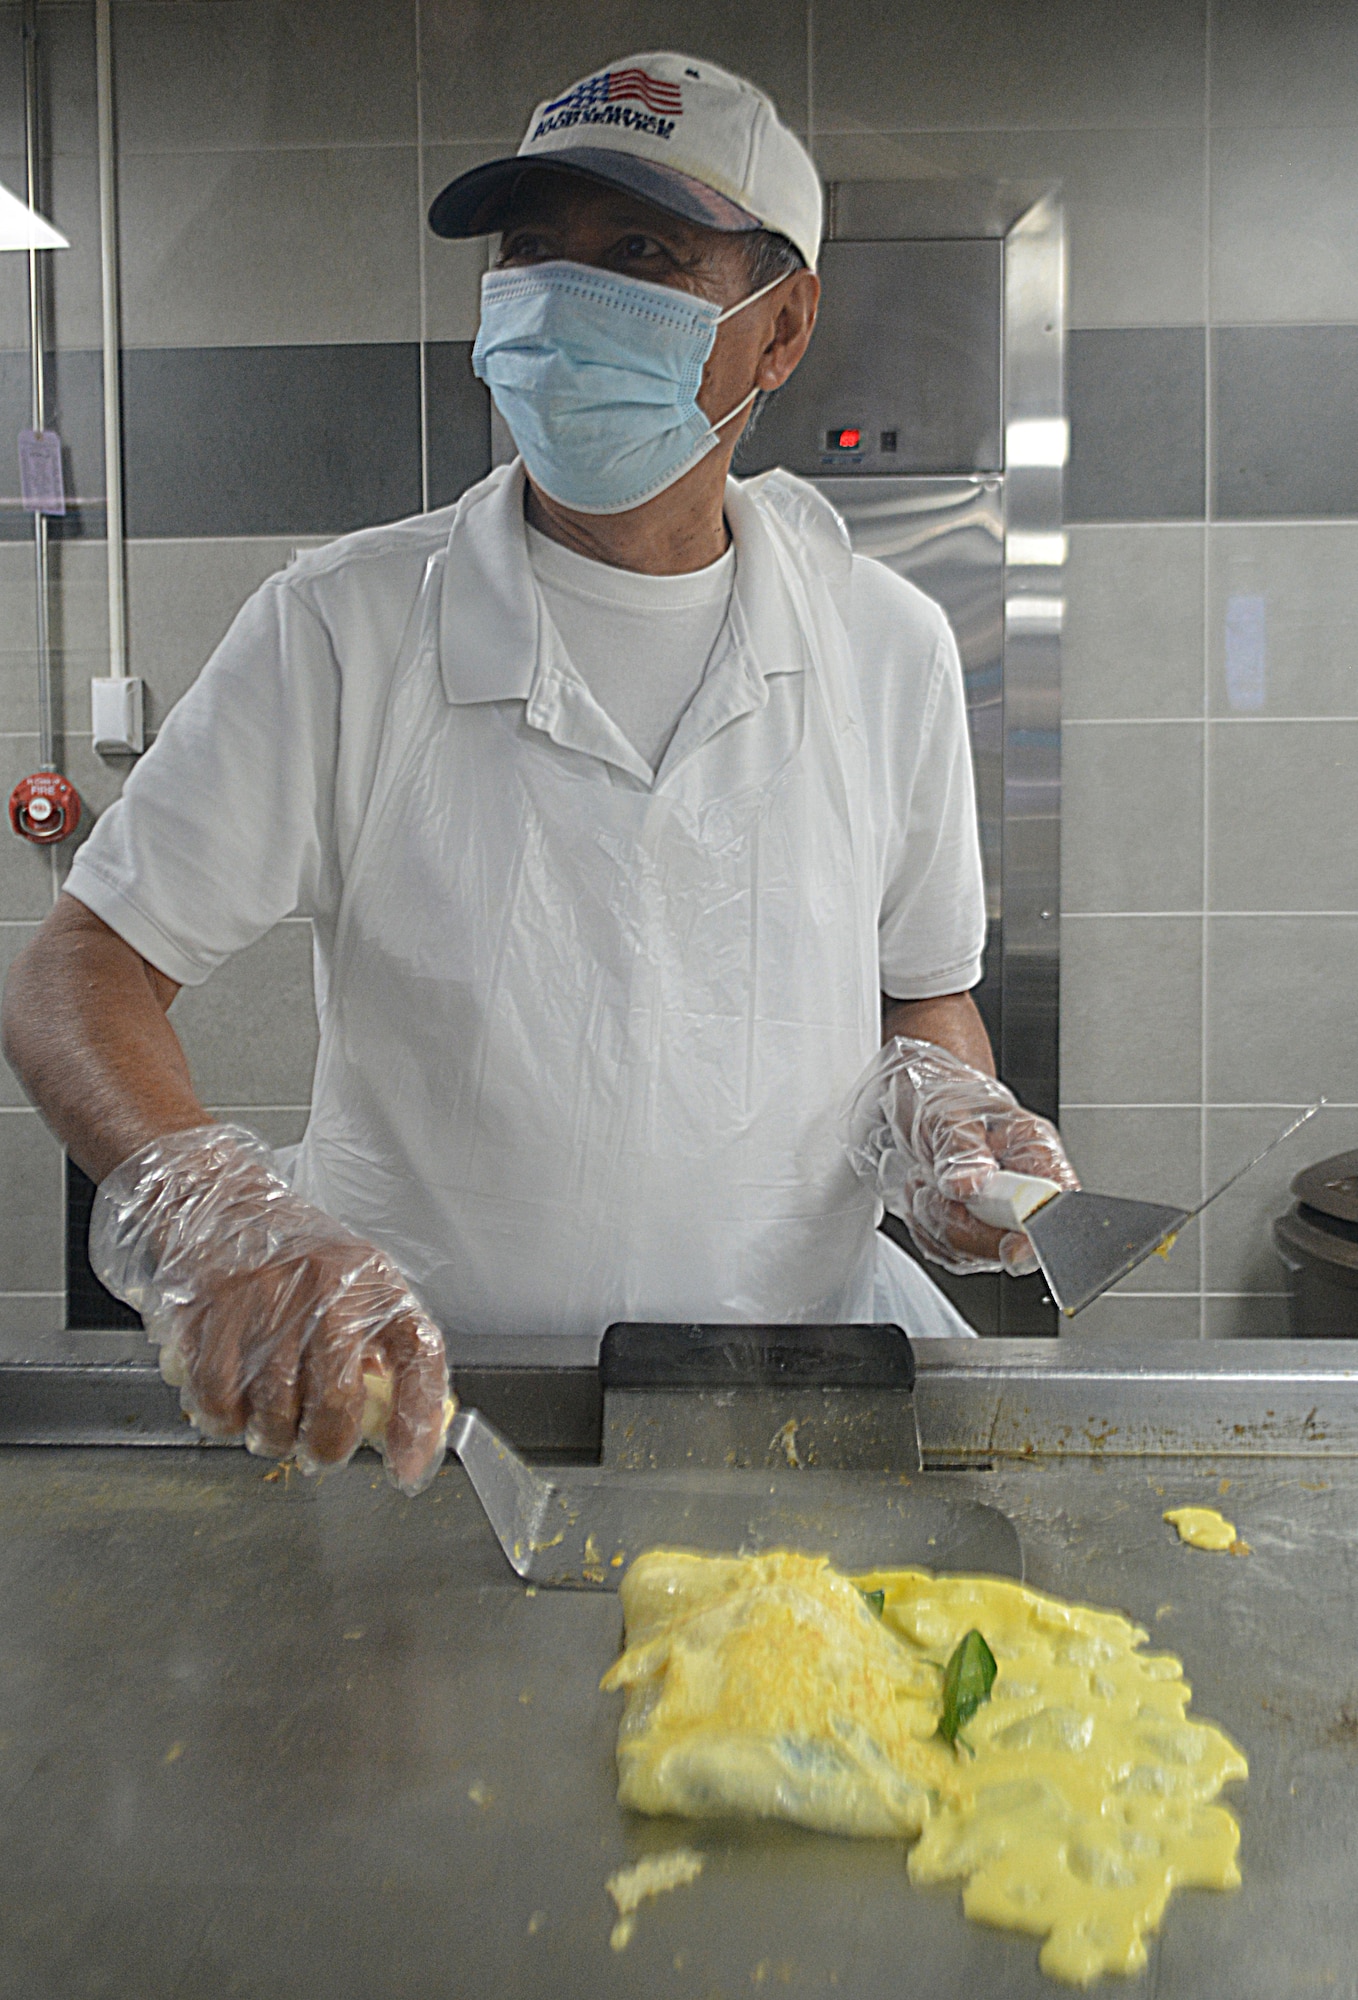 Julian Dancel, Freedom Hall Dining Facility cook, grills an omelet for an Airman during breakfast service at the Freedom Hall Dining Facility at Joint Base Andrews, Md., Oct. 4, 2022.